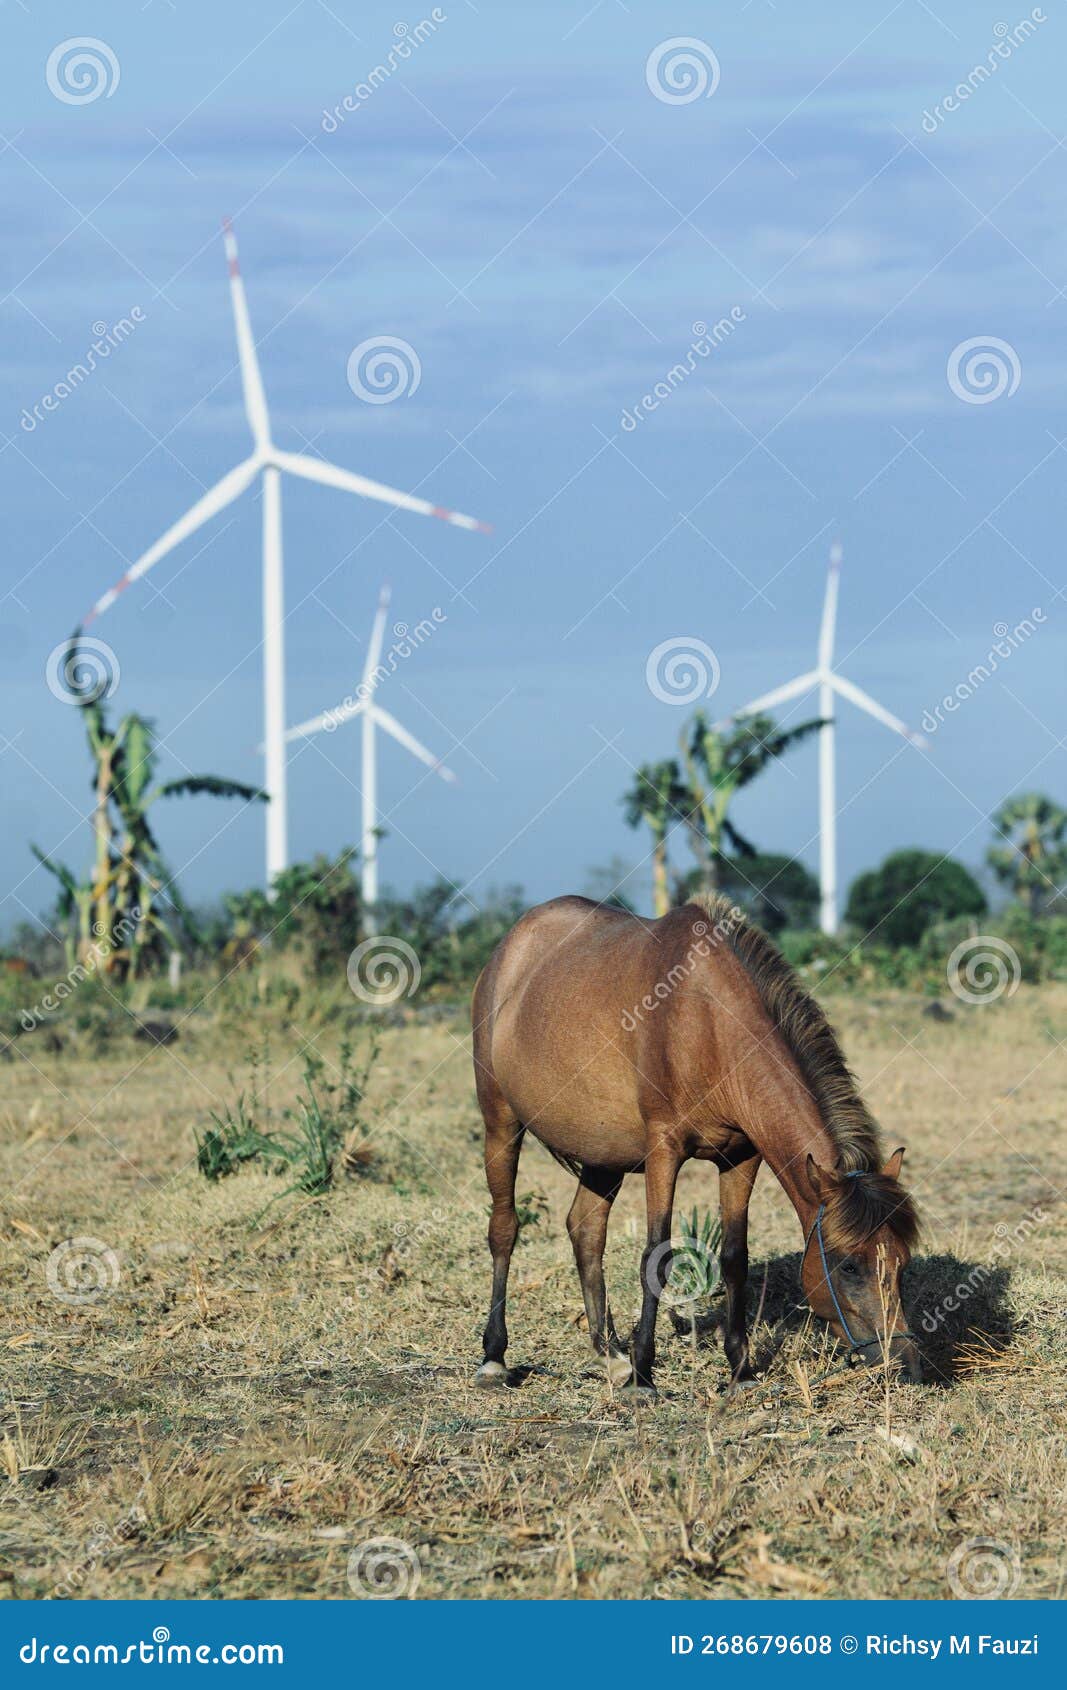 horse an sustainability resources